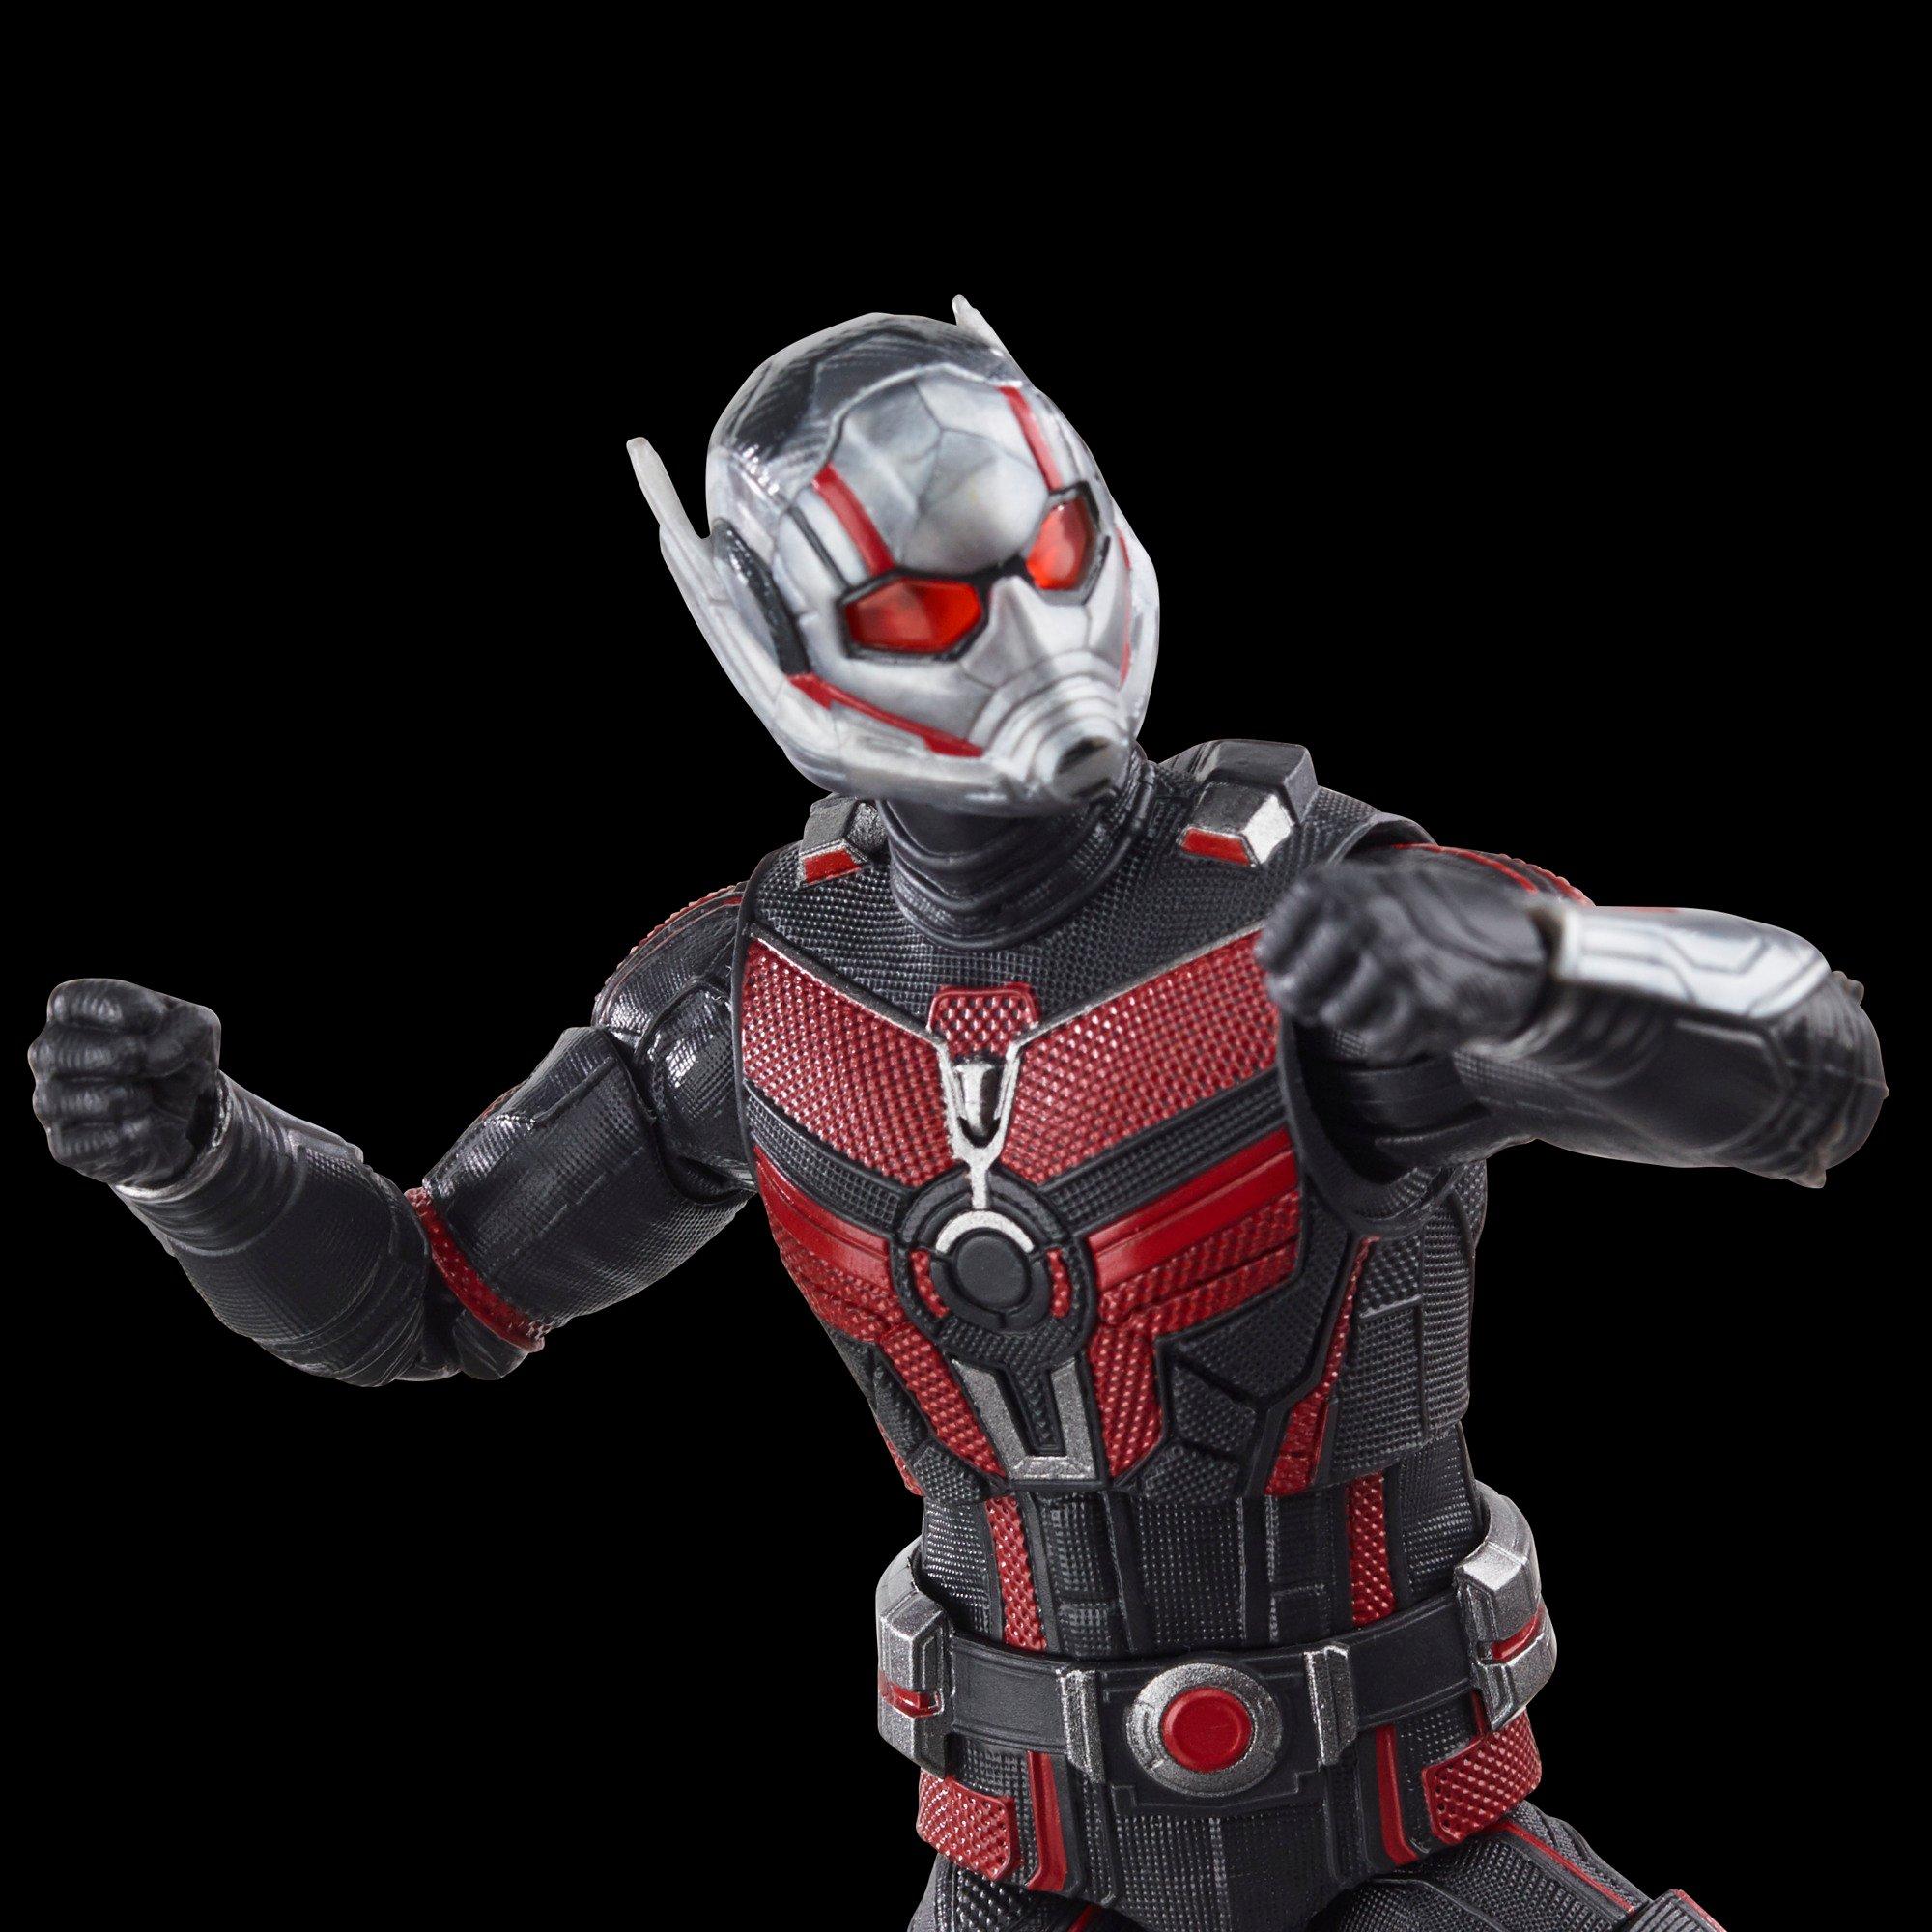 Funtime: 'Ant-Man and the Wasp' shows Marvel's lighthearted side